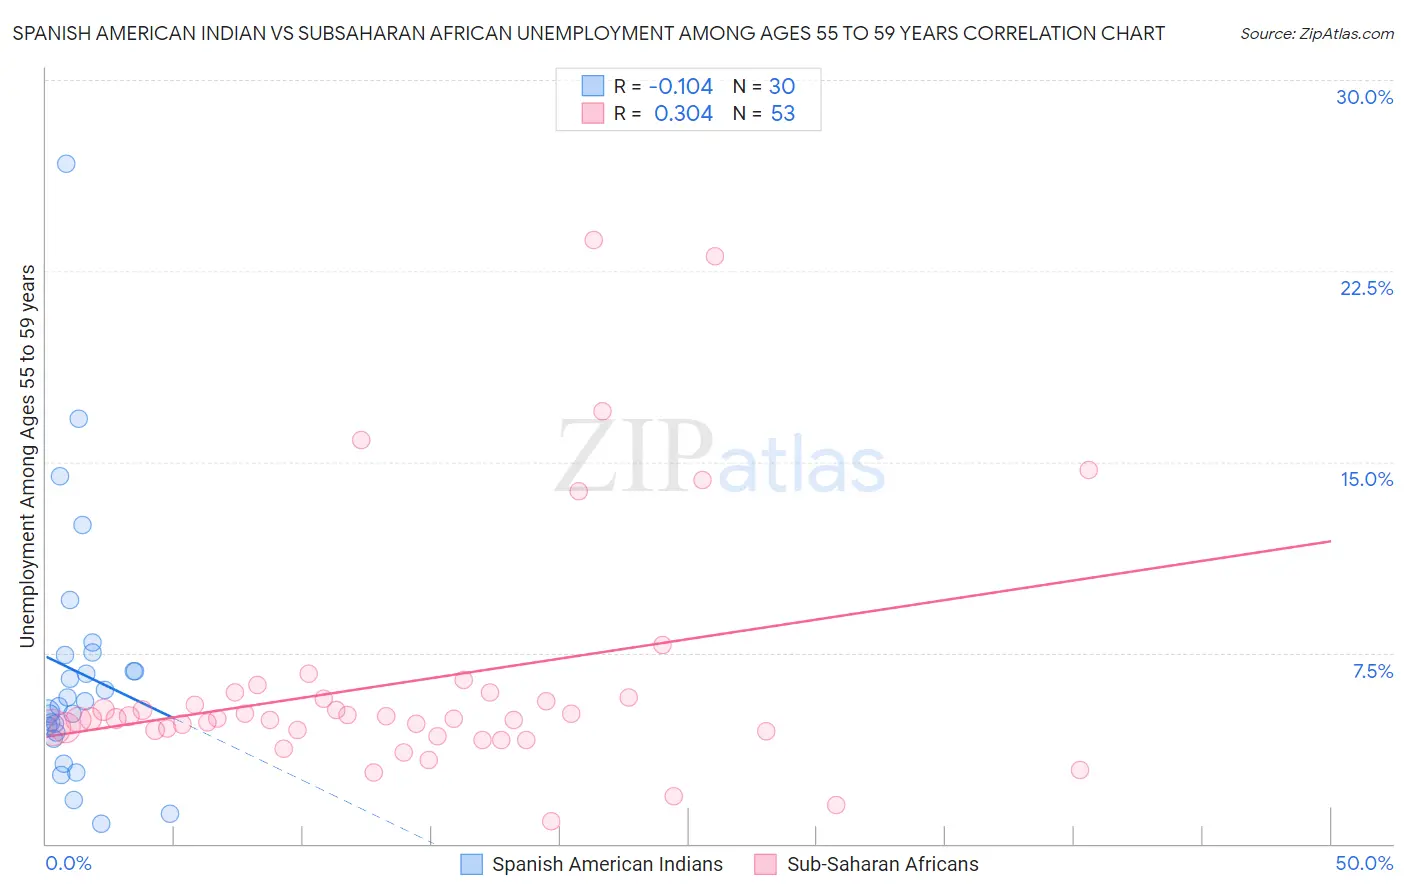 Spanish American Indian vs Subsaharan African Unemployment Among Ages 55 to 59 years